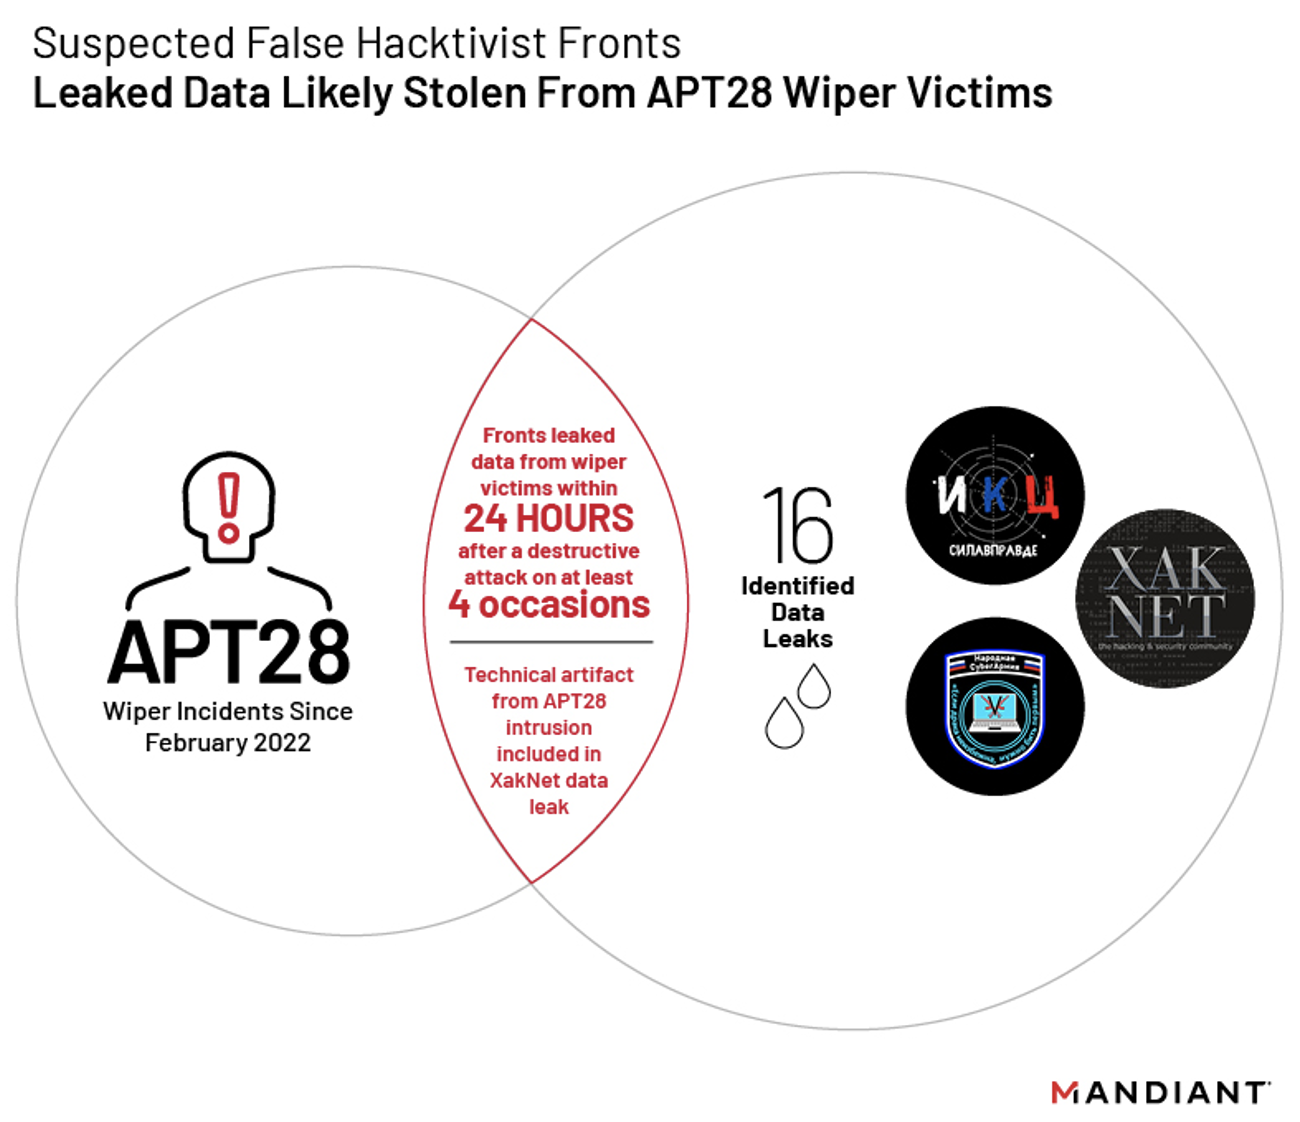 Suspected false hacktivist fronts leaked data likely stolen from APT28 wiper victims